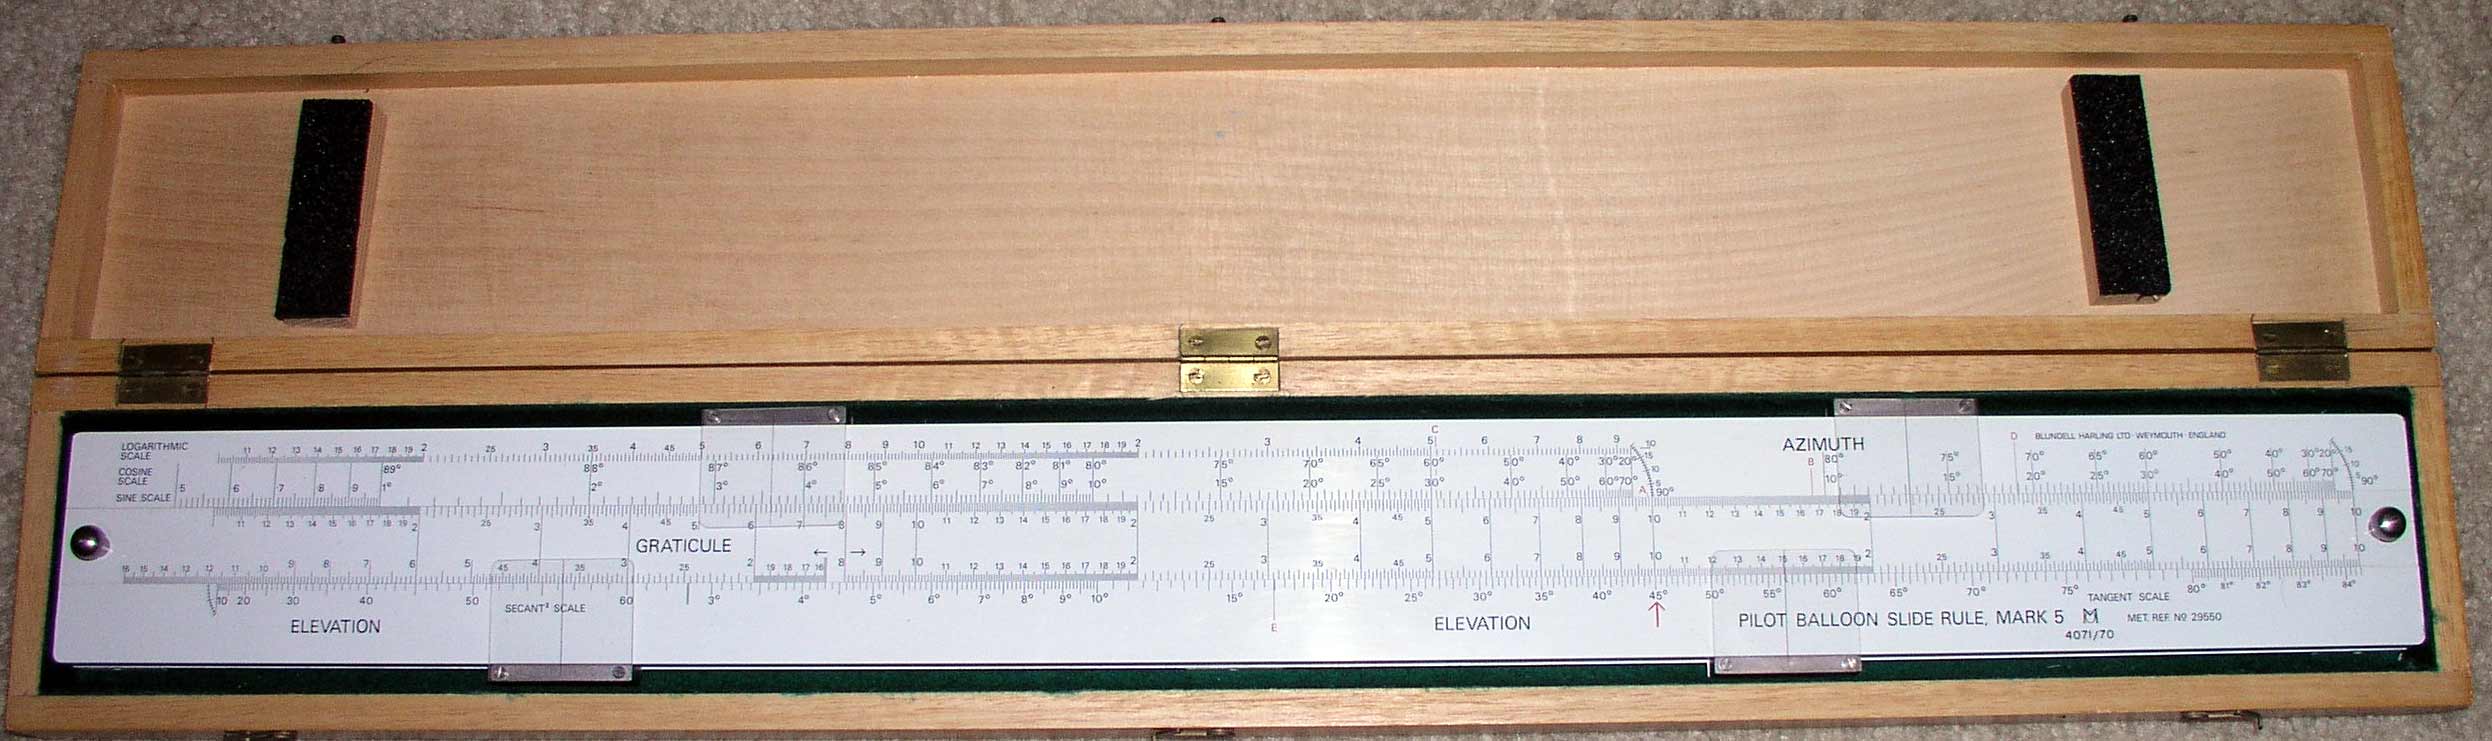 Large Image of a MK 5 Pilot Balloon Slide Rule showing Scales and Cursers